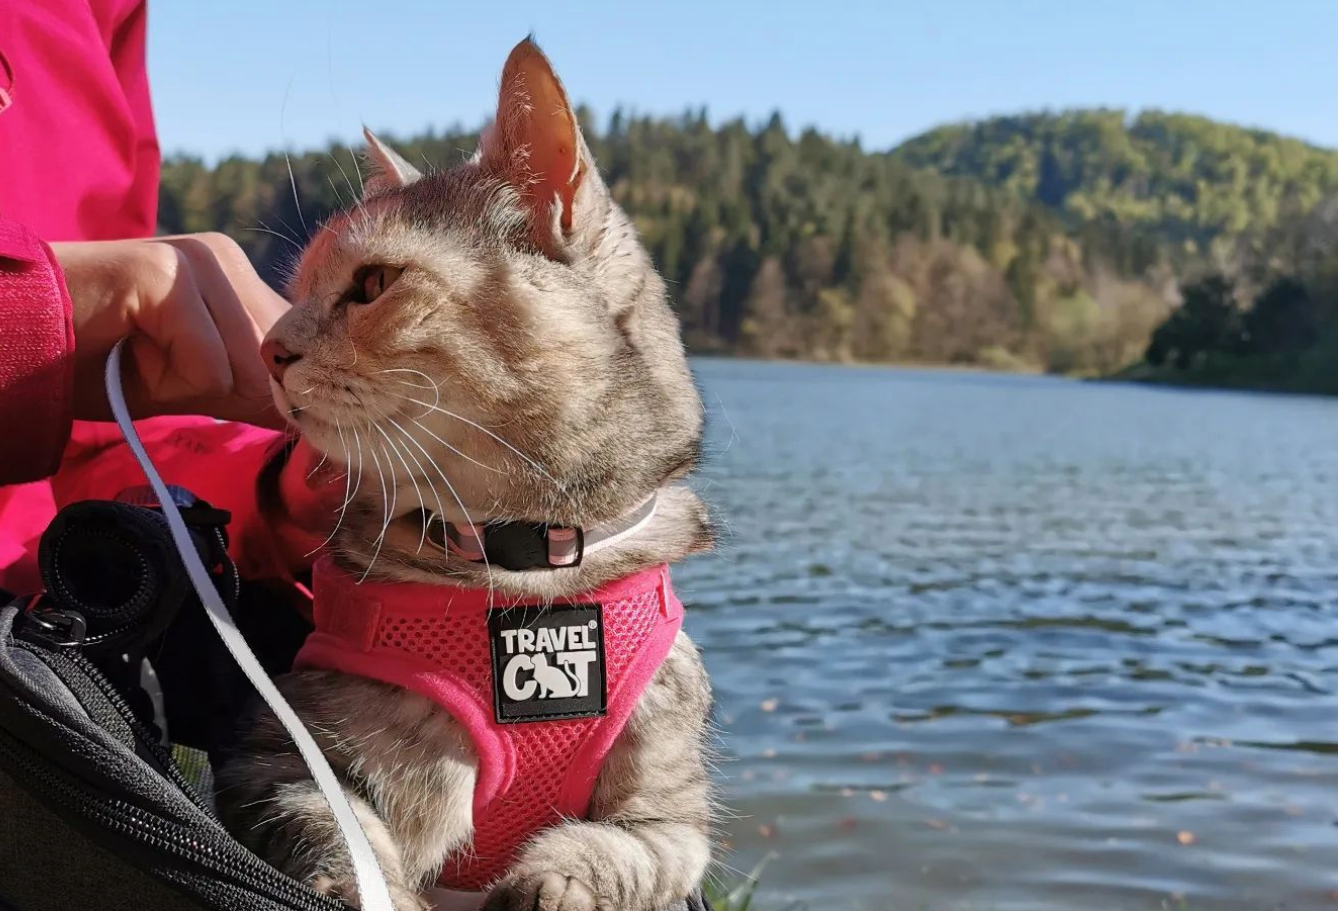 Travel Cat Tuesday: Meet Peanut, the Fearless Adventure Queen from Slovenia